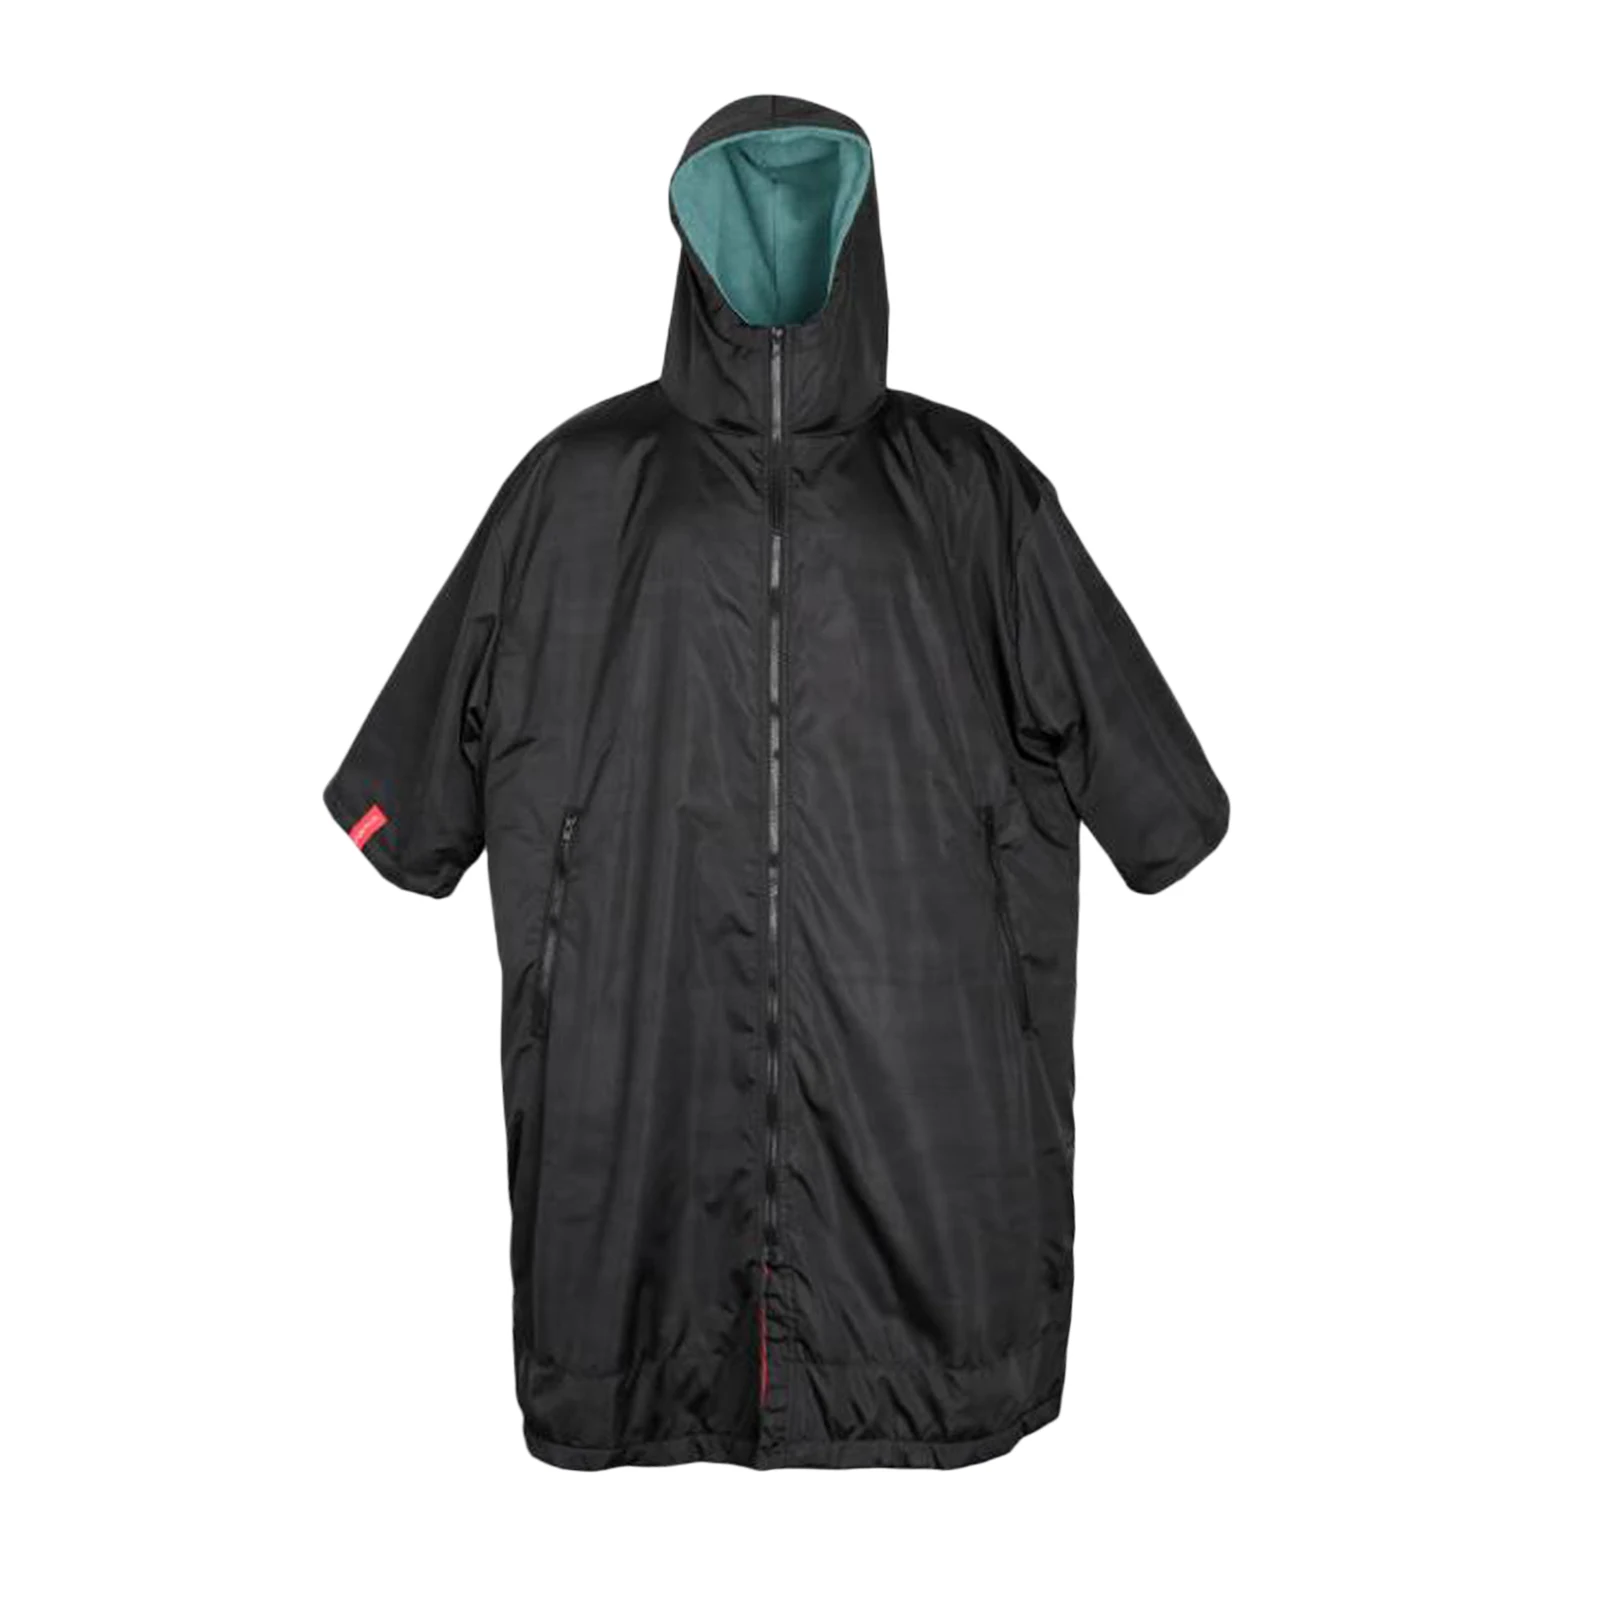 Adults Change Robe Jacket, Keeping Warm Dry Windproof Waterproof Oversized Poncho Coat for Swimming Surfing Beach